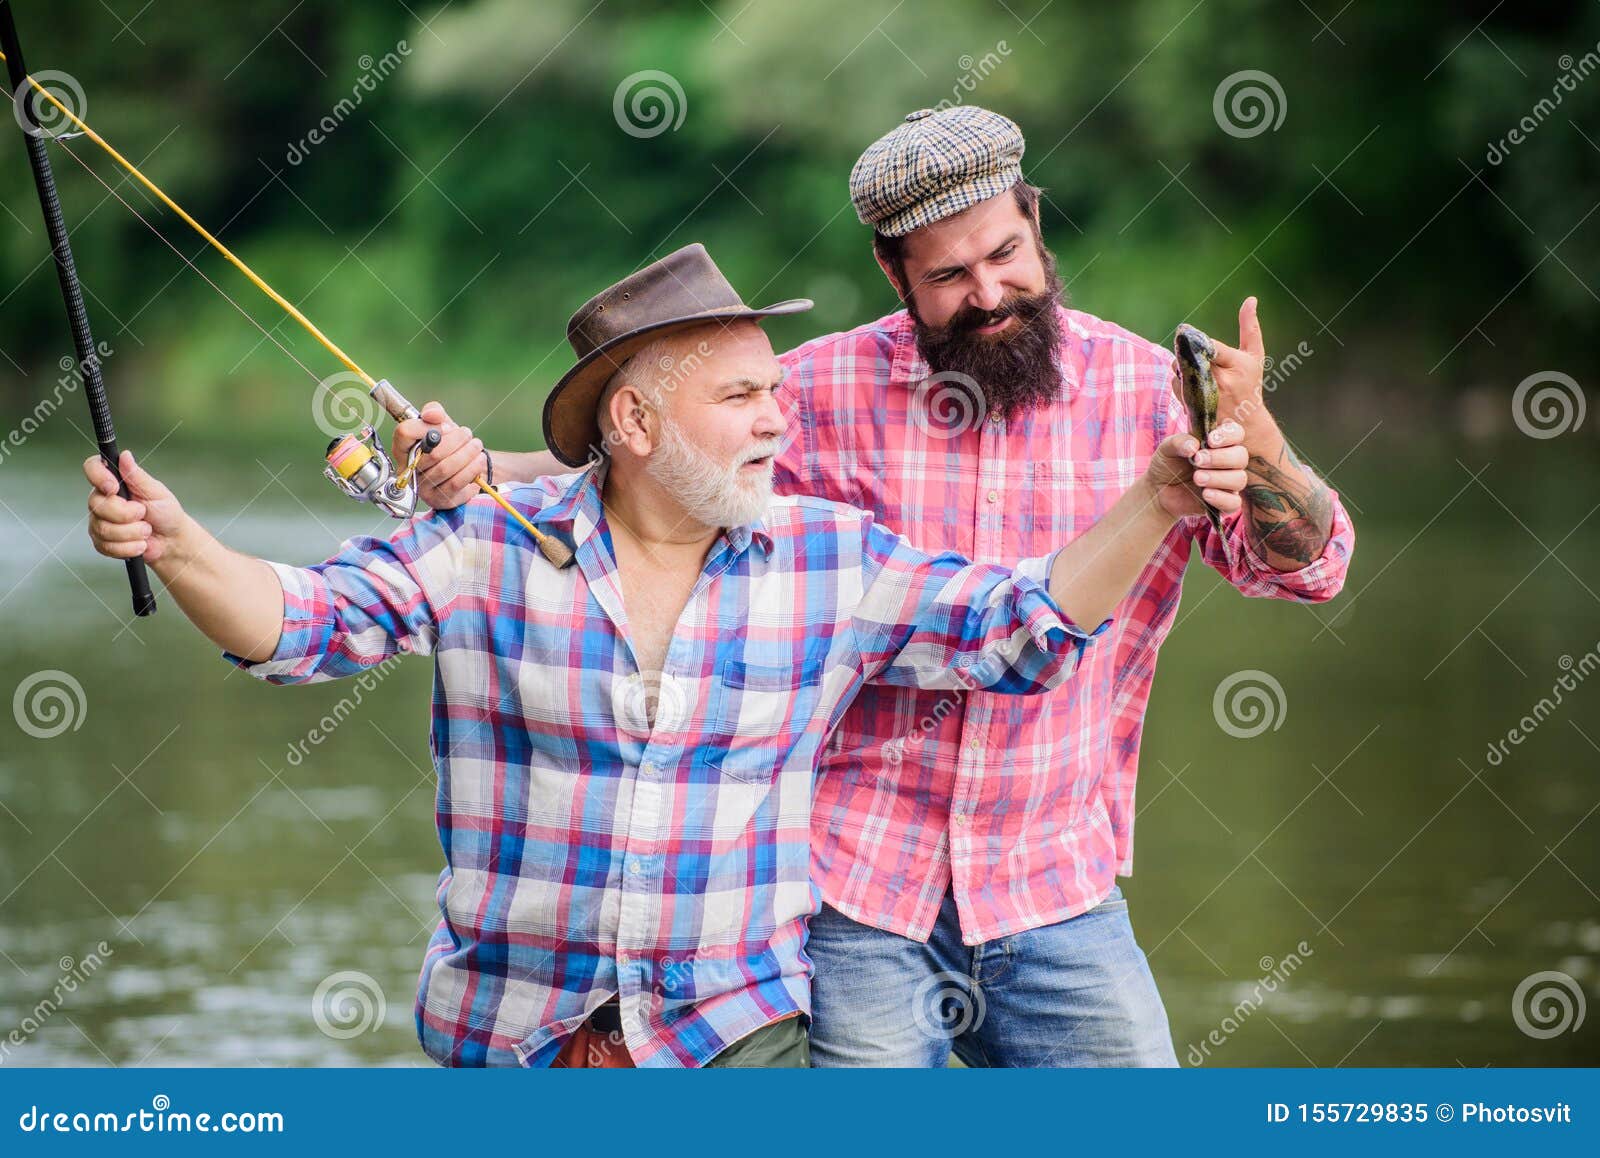 Fishing Peaceful Activity. Father and Son Fishing. Grandpa and Mature Man  Friends. Fisherman Family. Rod Tackle Stock Image - Image of cheerful,  fish: 155729835